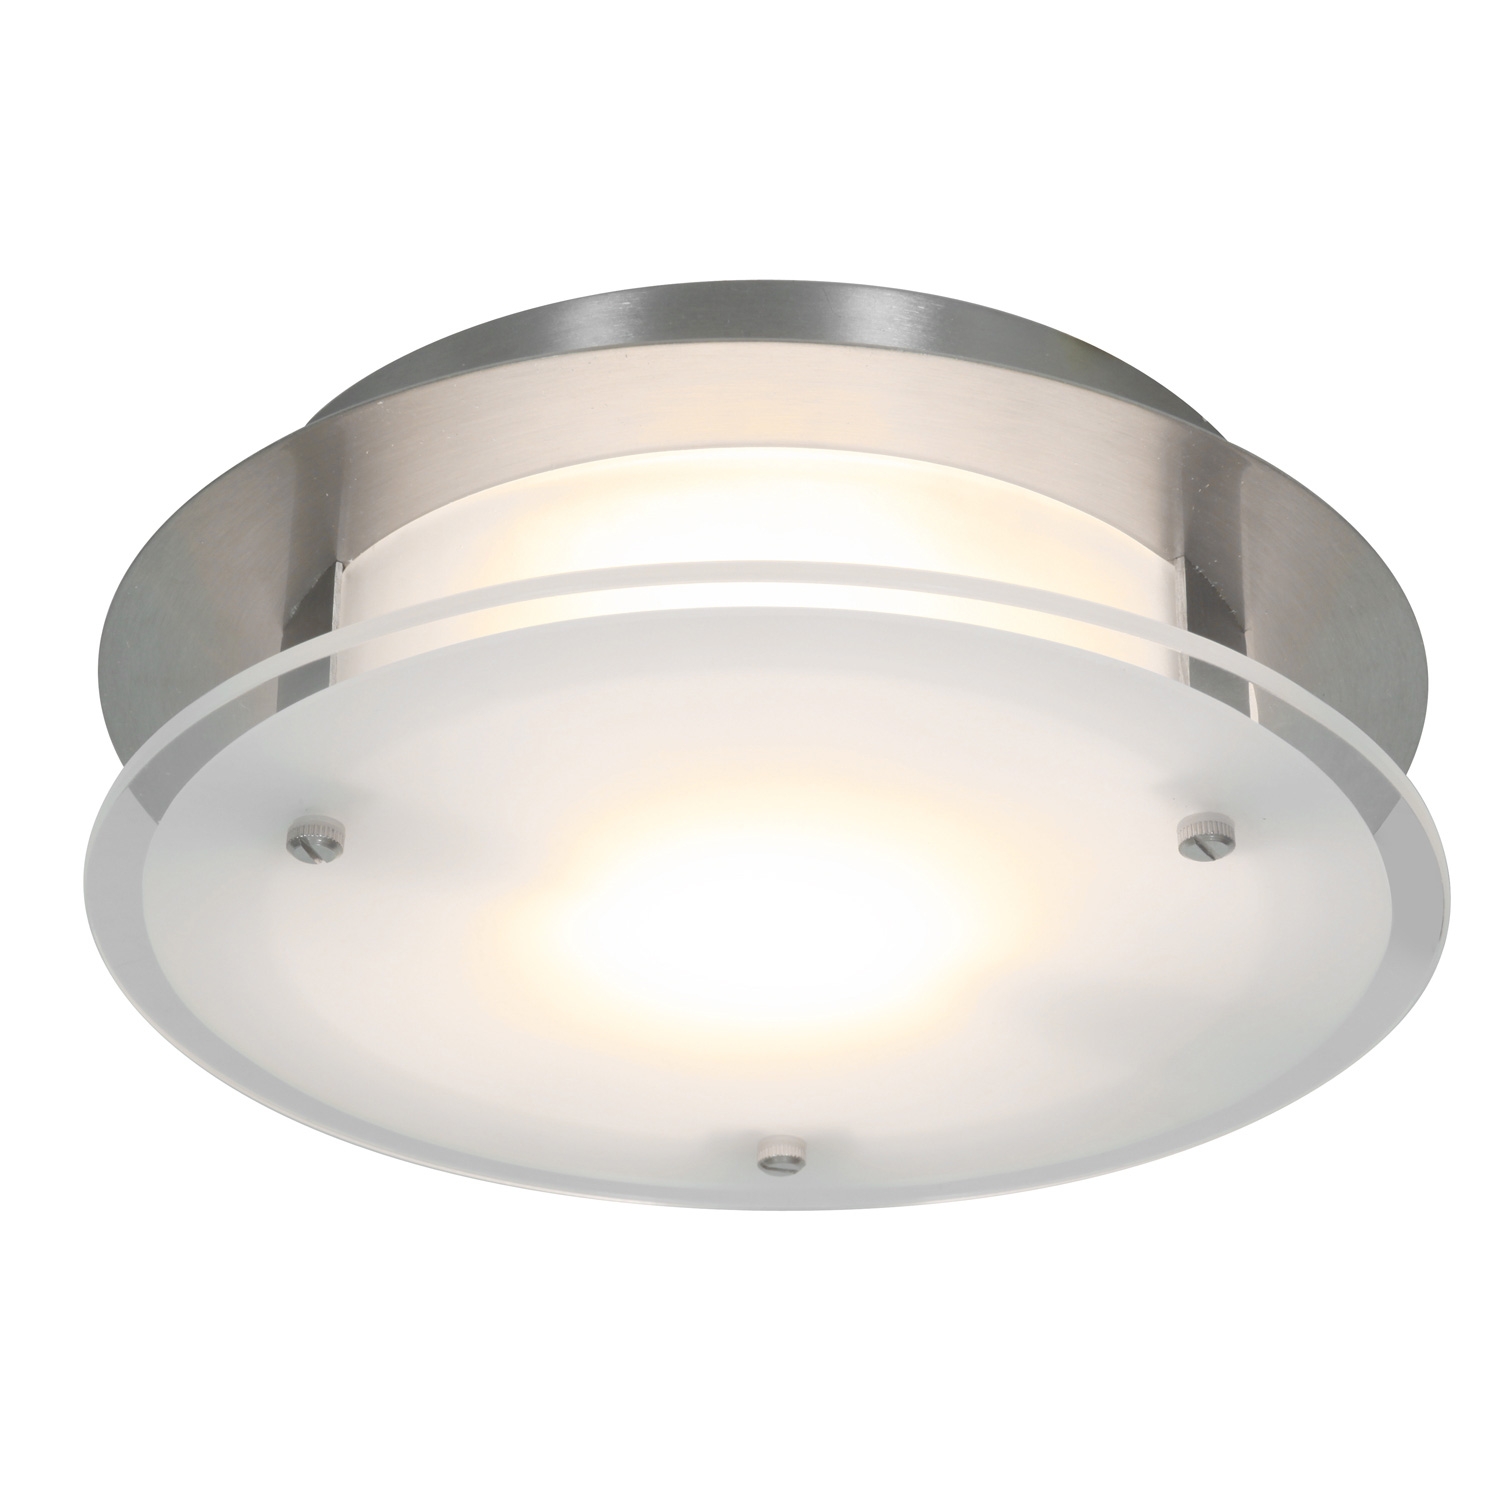 Permalink to Round Ceiling Exhaust Fan With Light